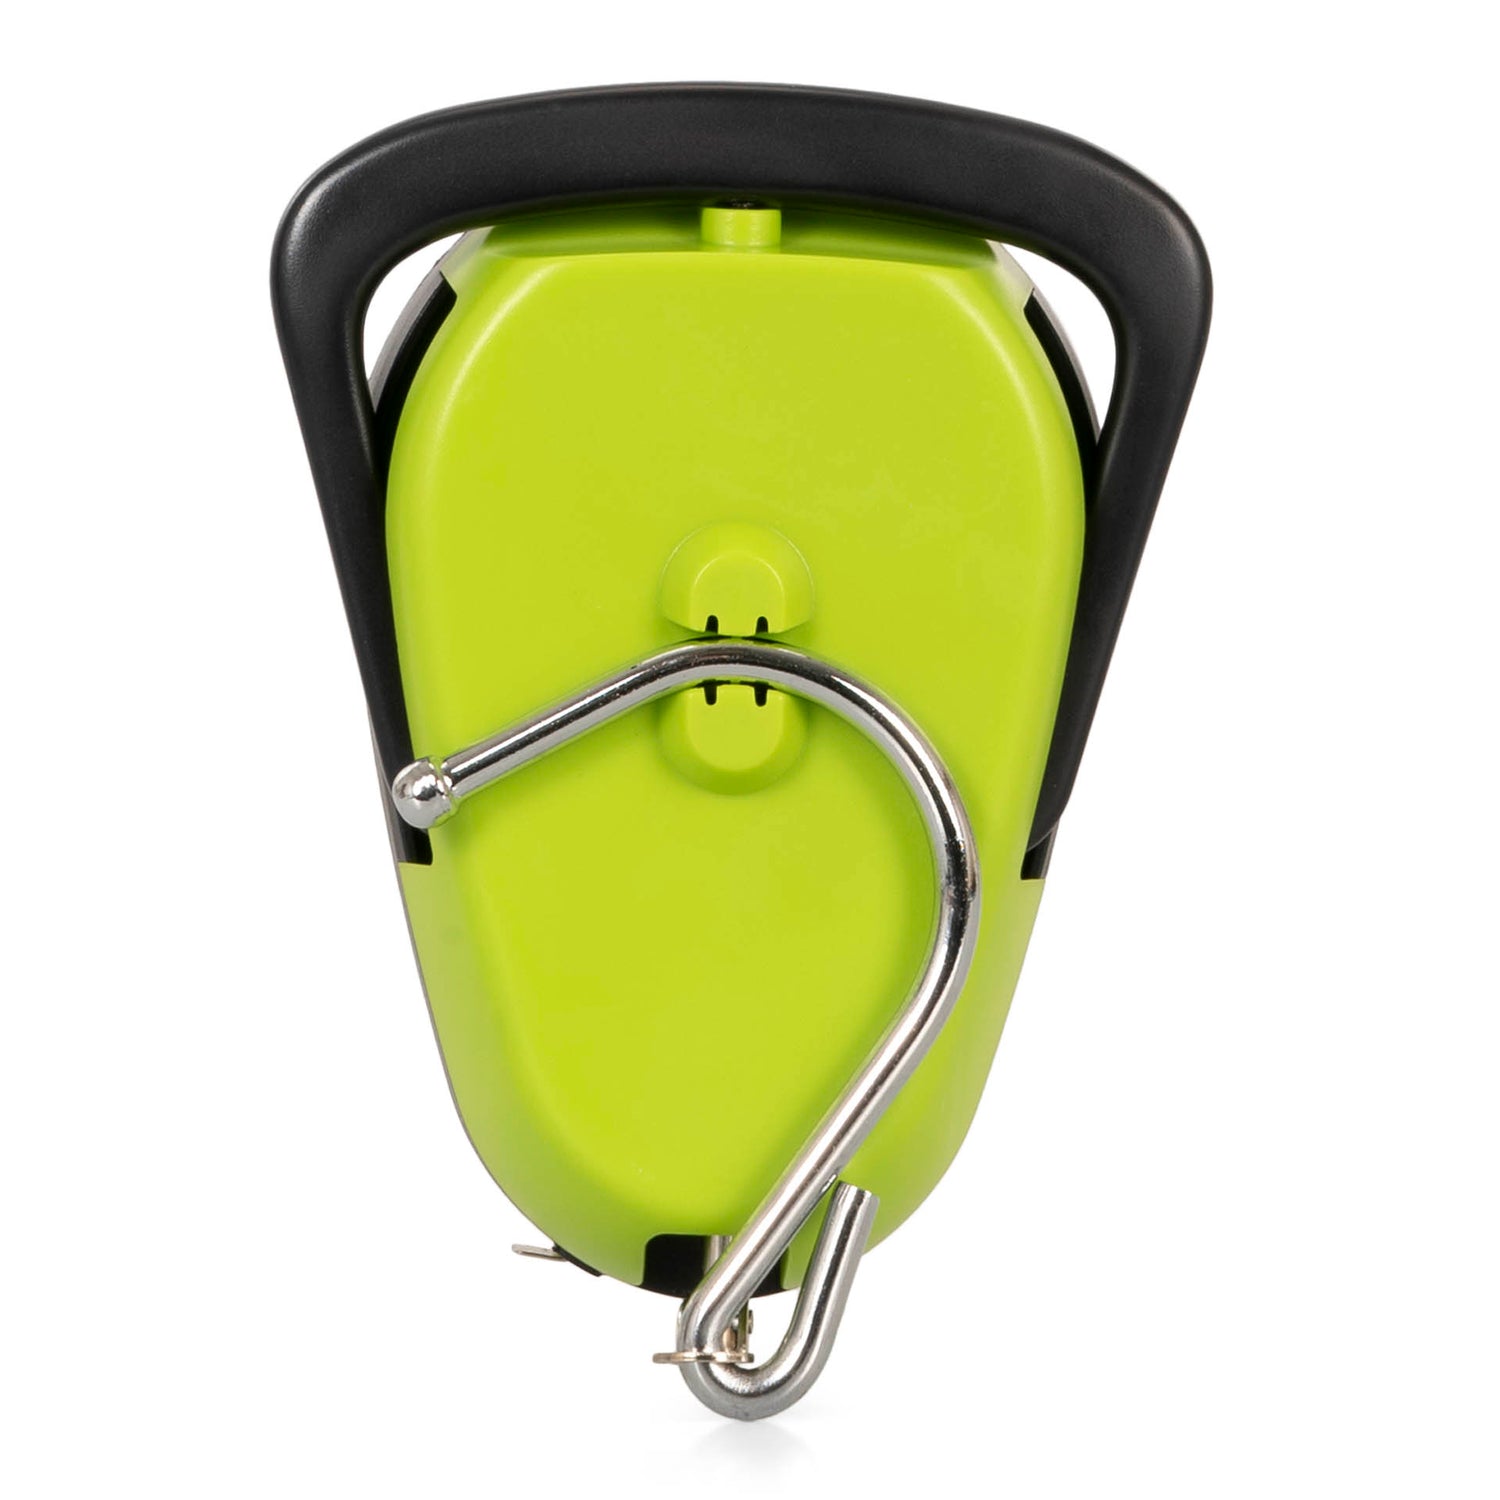 Backside of a green analog luggage scale designed by Tracker showing  its hook, handle, and neon green colour.